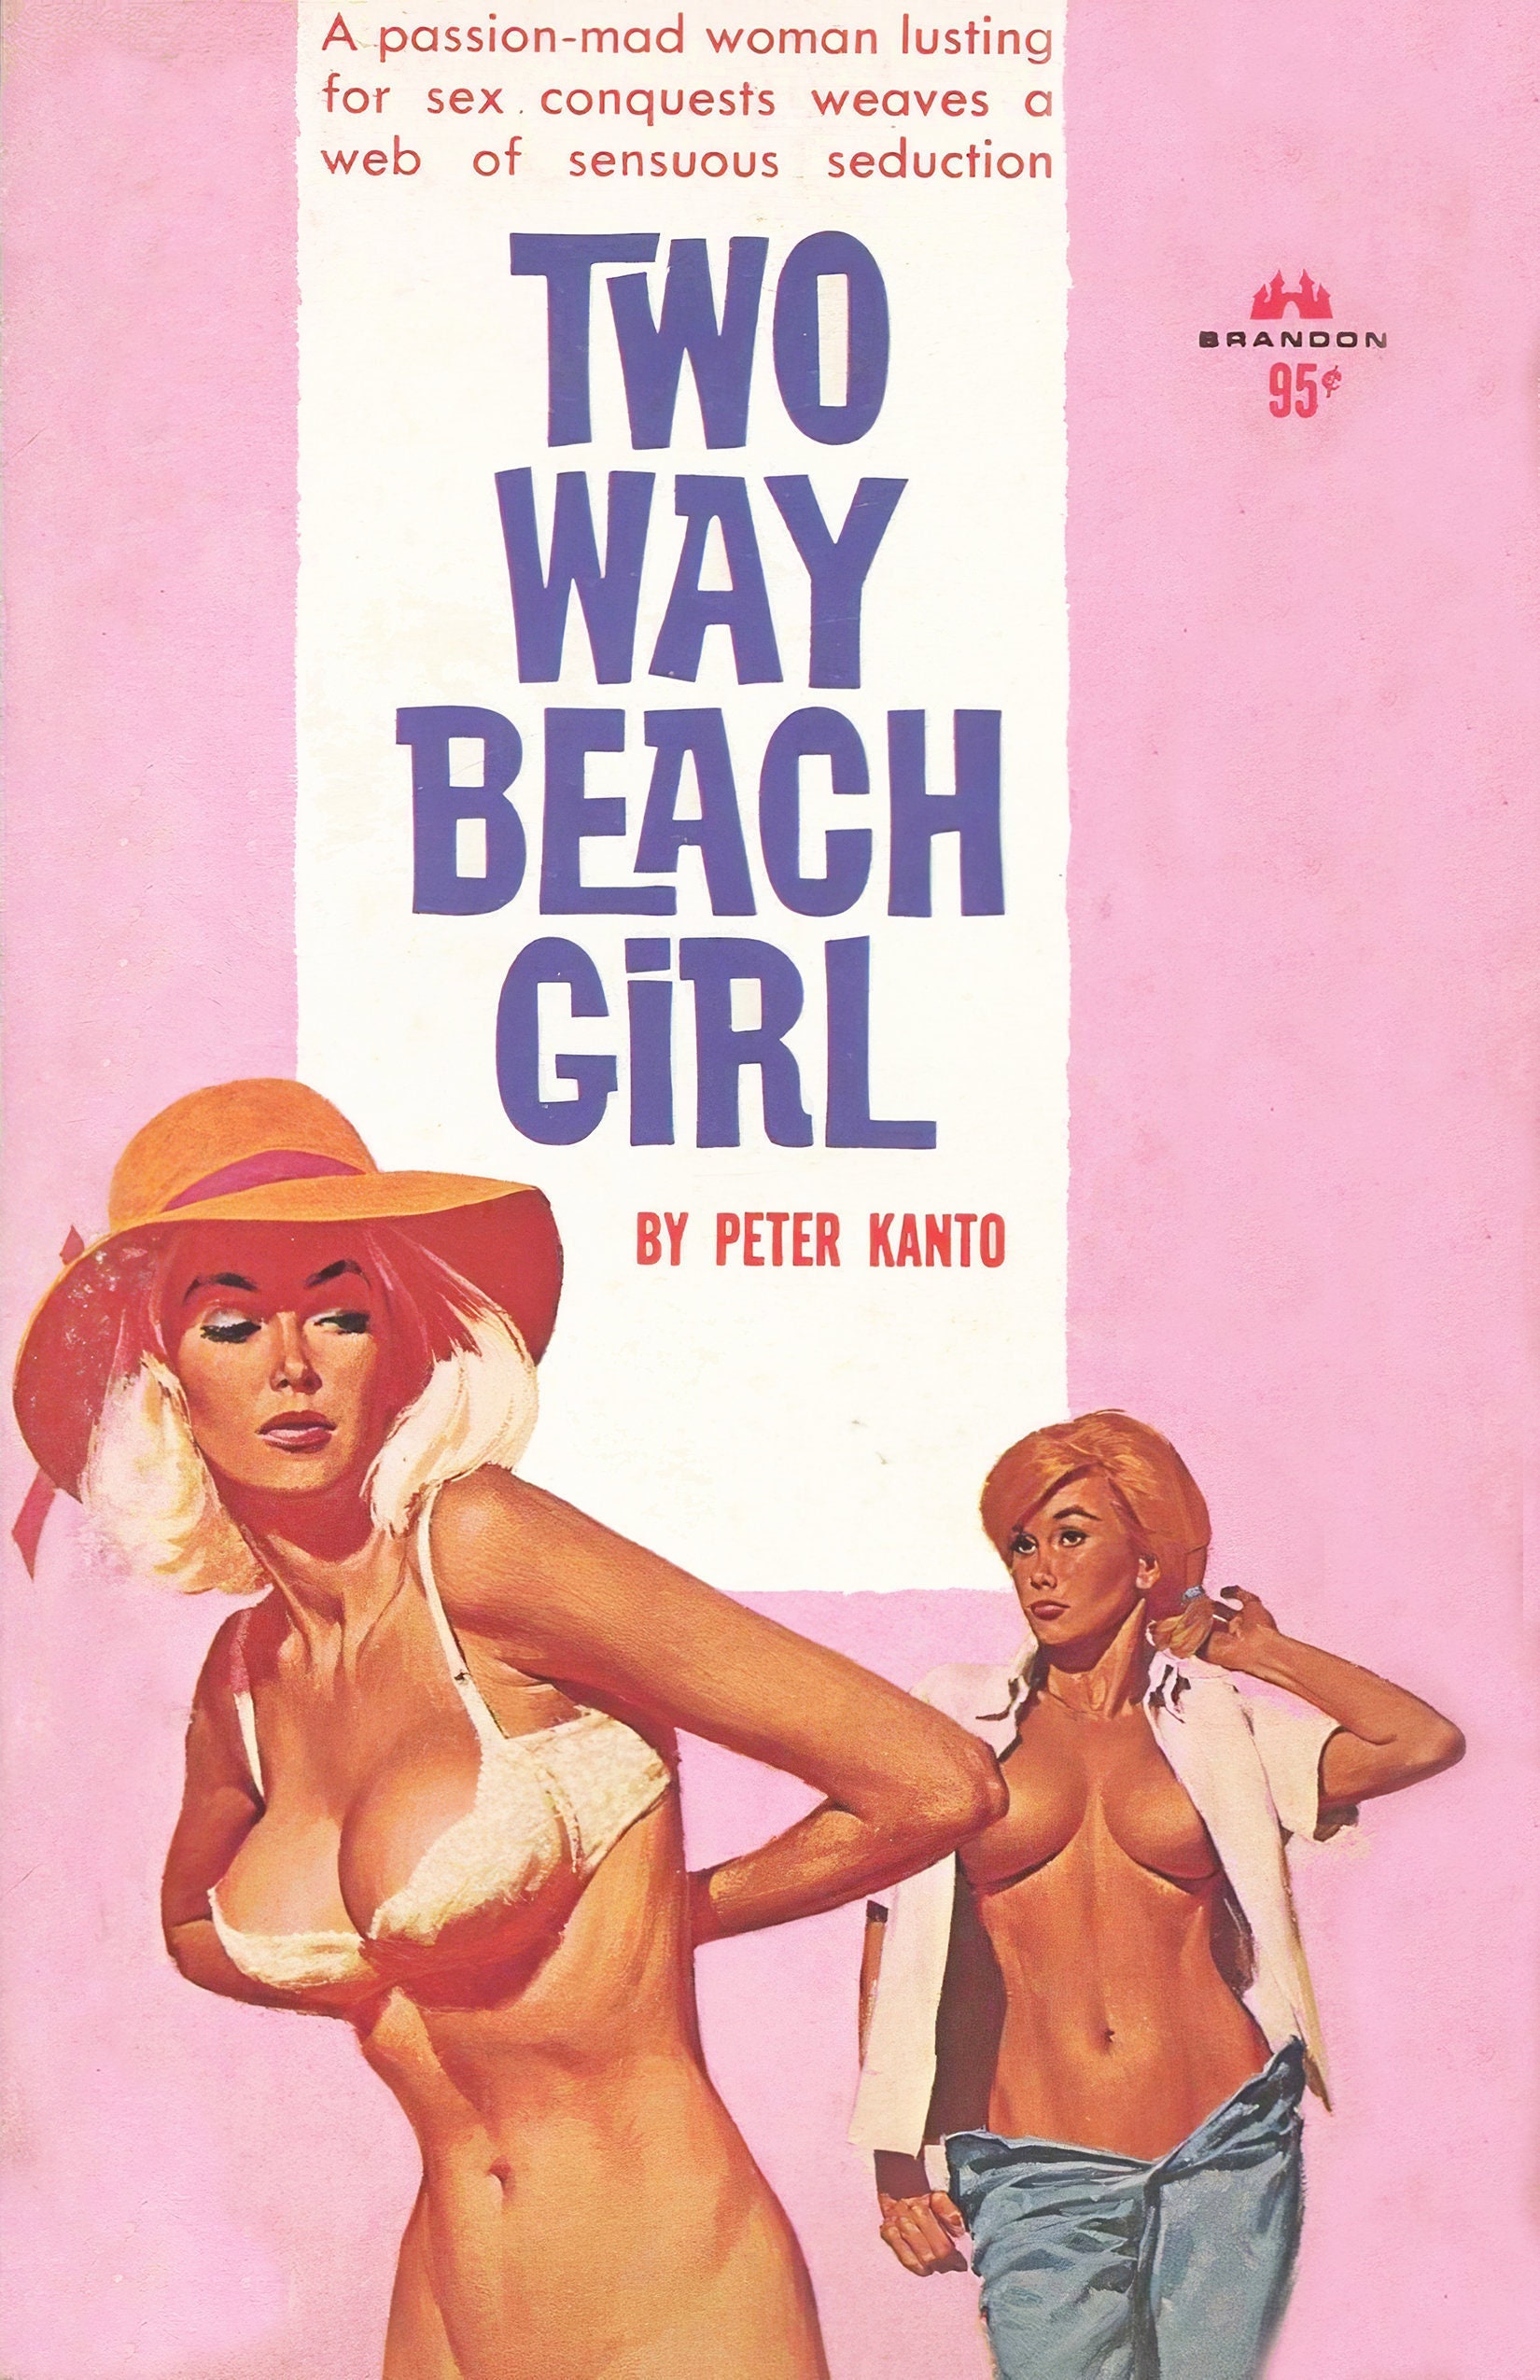 Vintage Erotic Pulp Poster Two Way Beach Girl Lesbian Queer